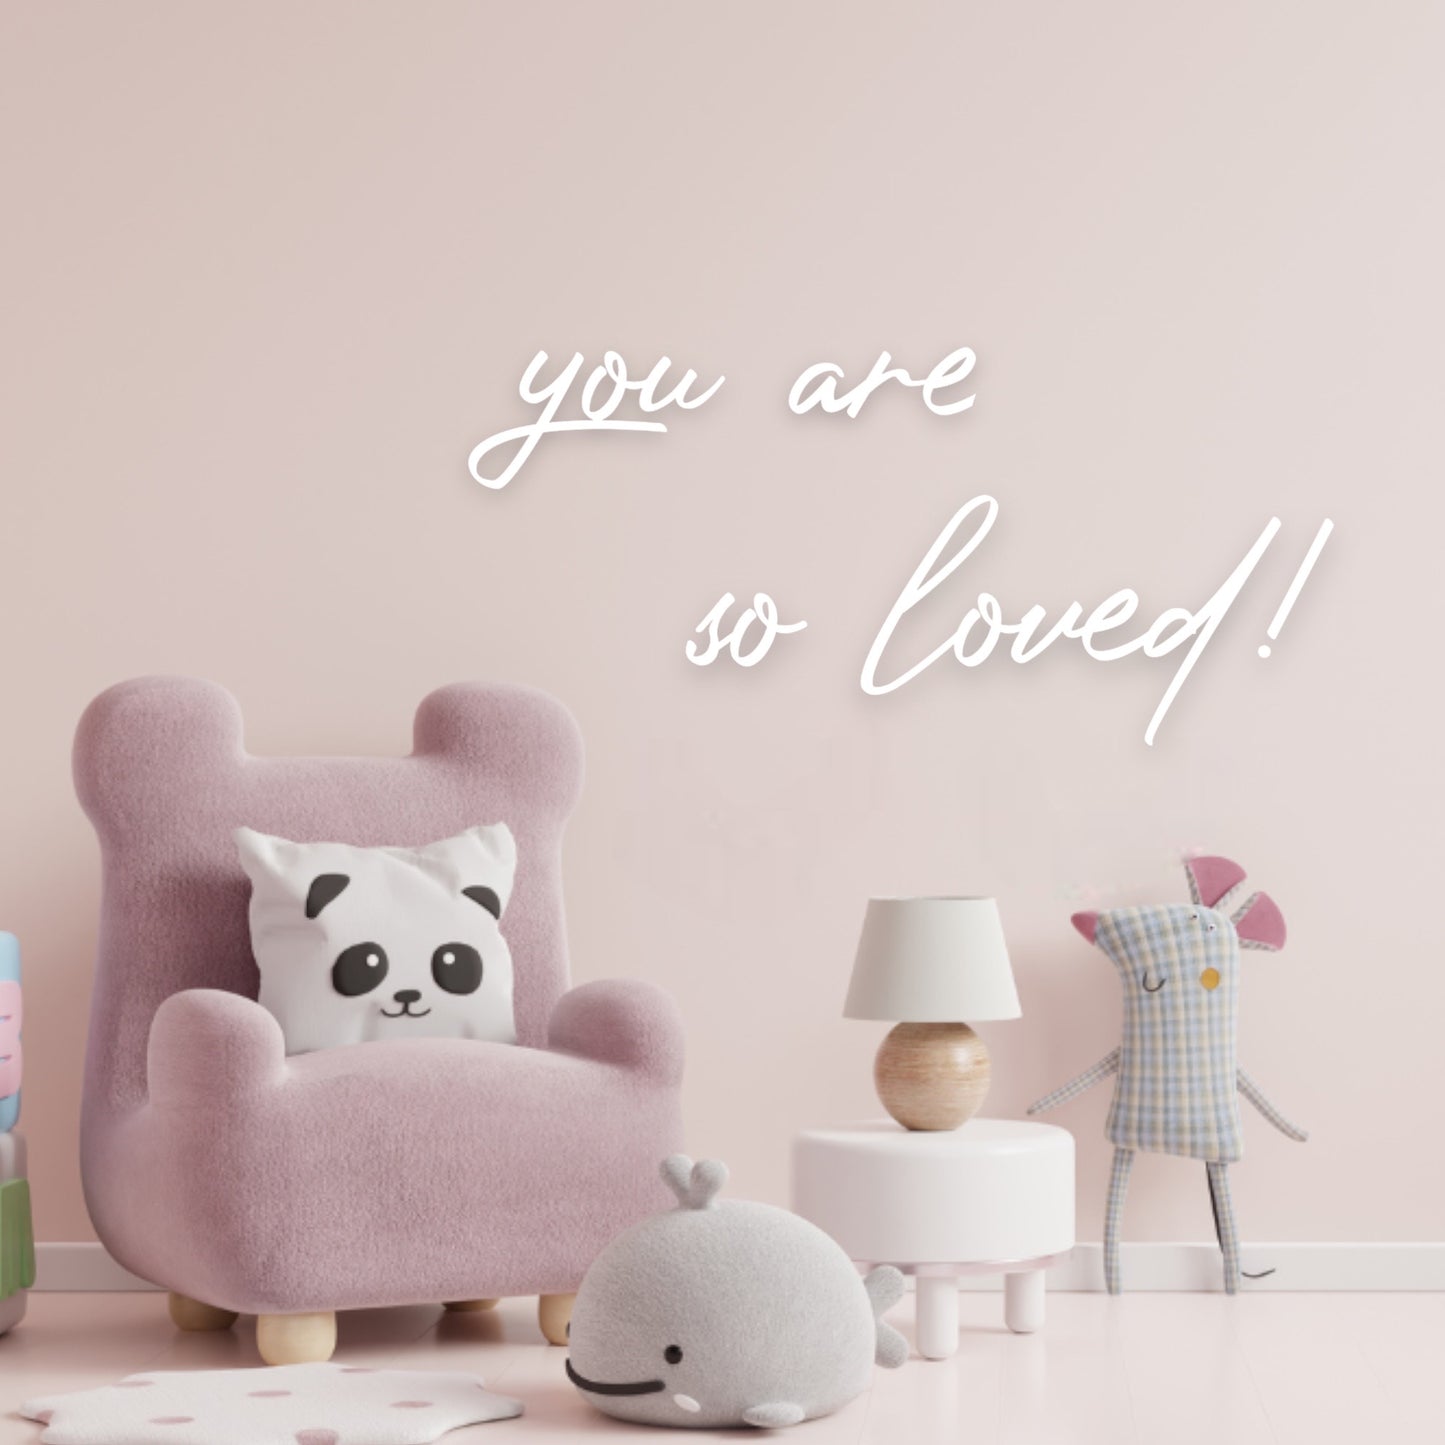 you are so loved! - Wandspruch